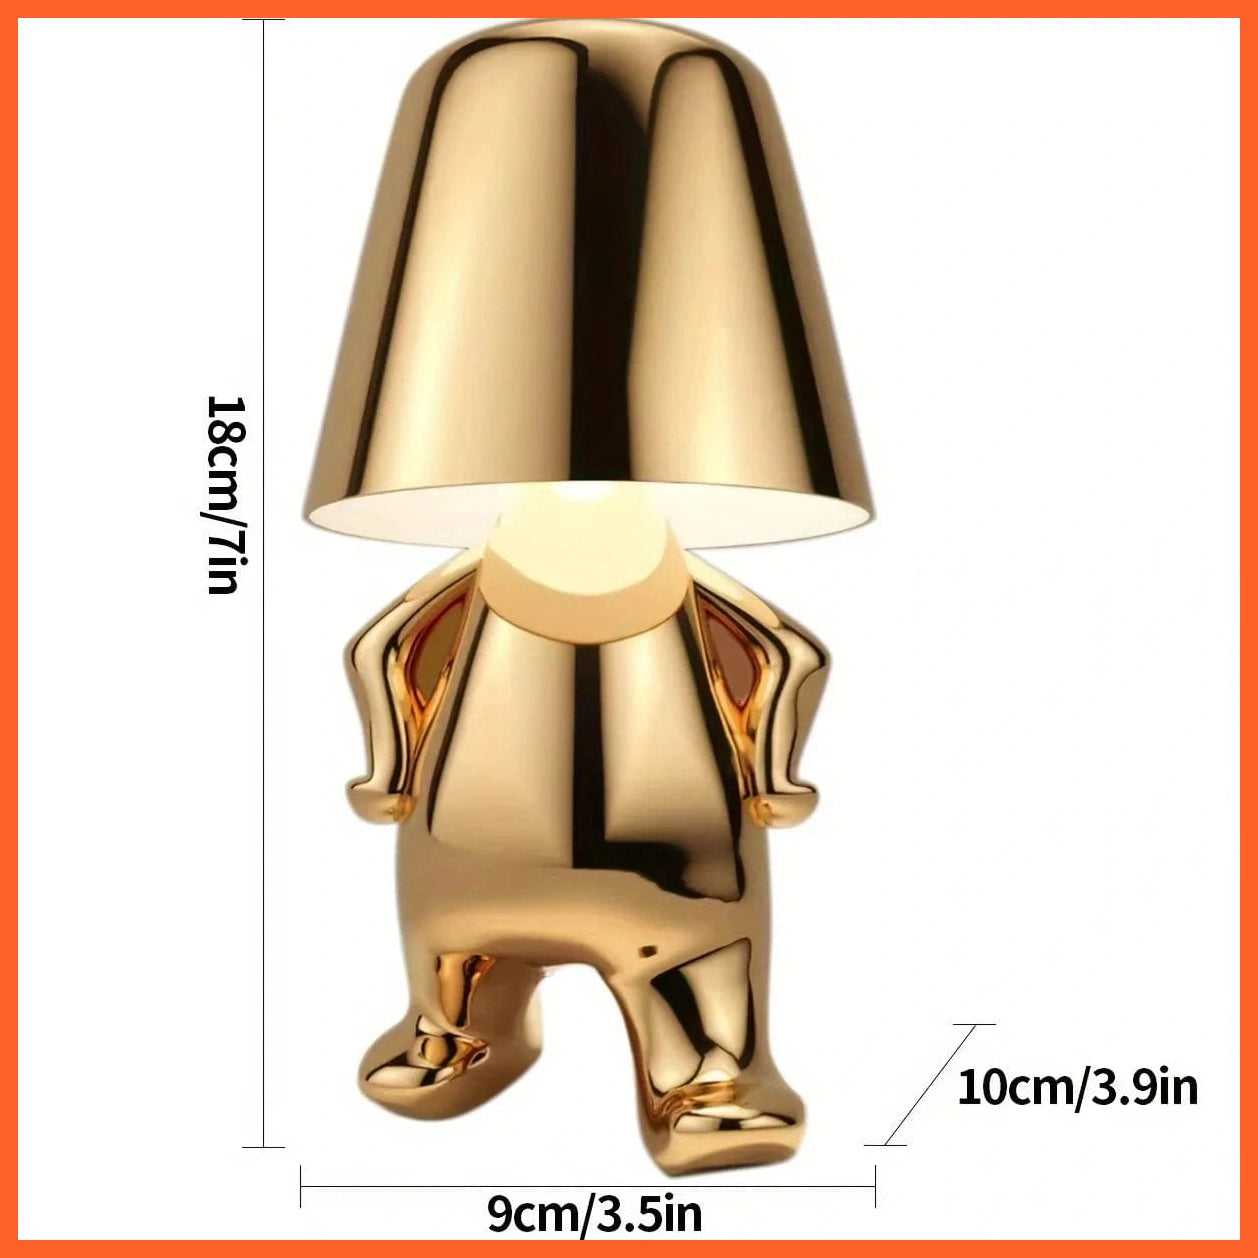 whatagift.com.au C Golden Color Thinker Statue LED Table Lamp With USB Port| Nightstand Lamp For Home, Living Room